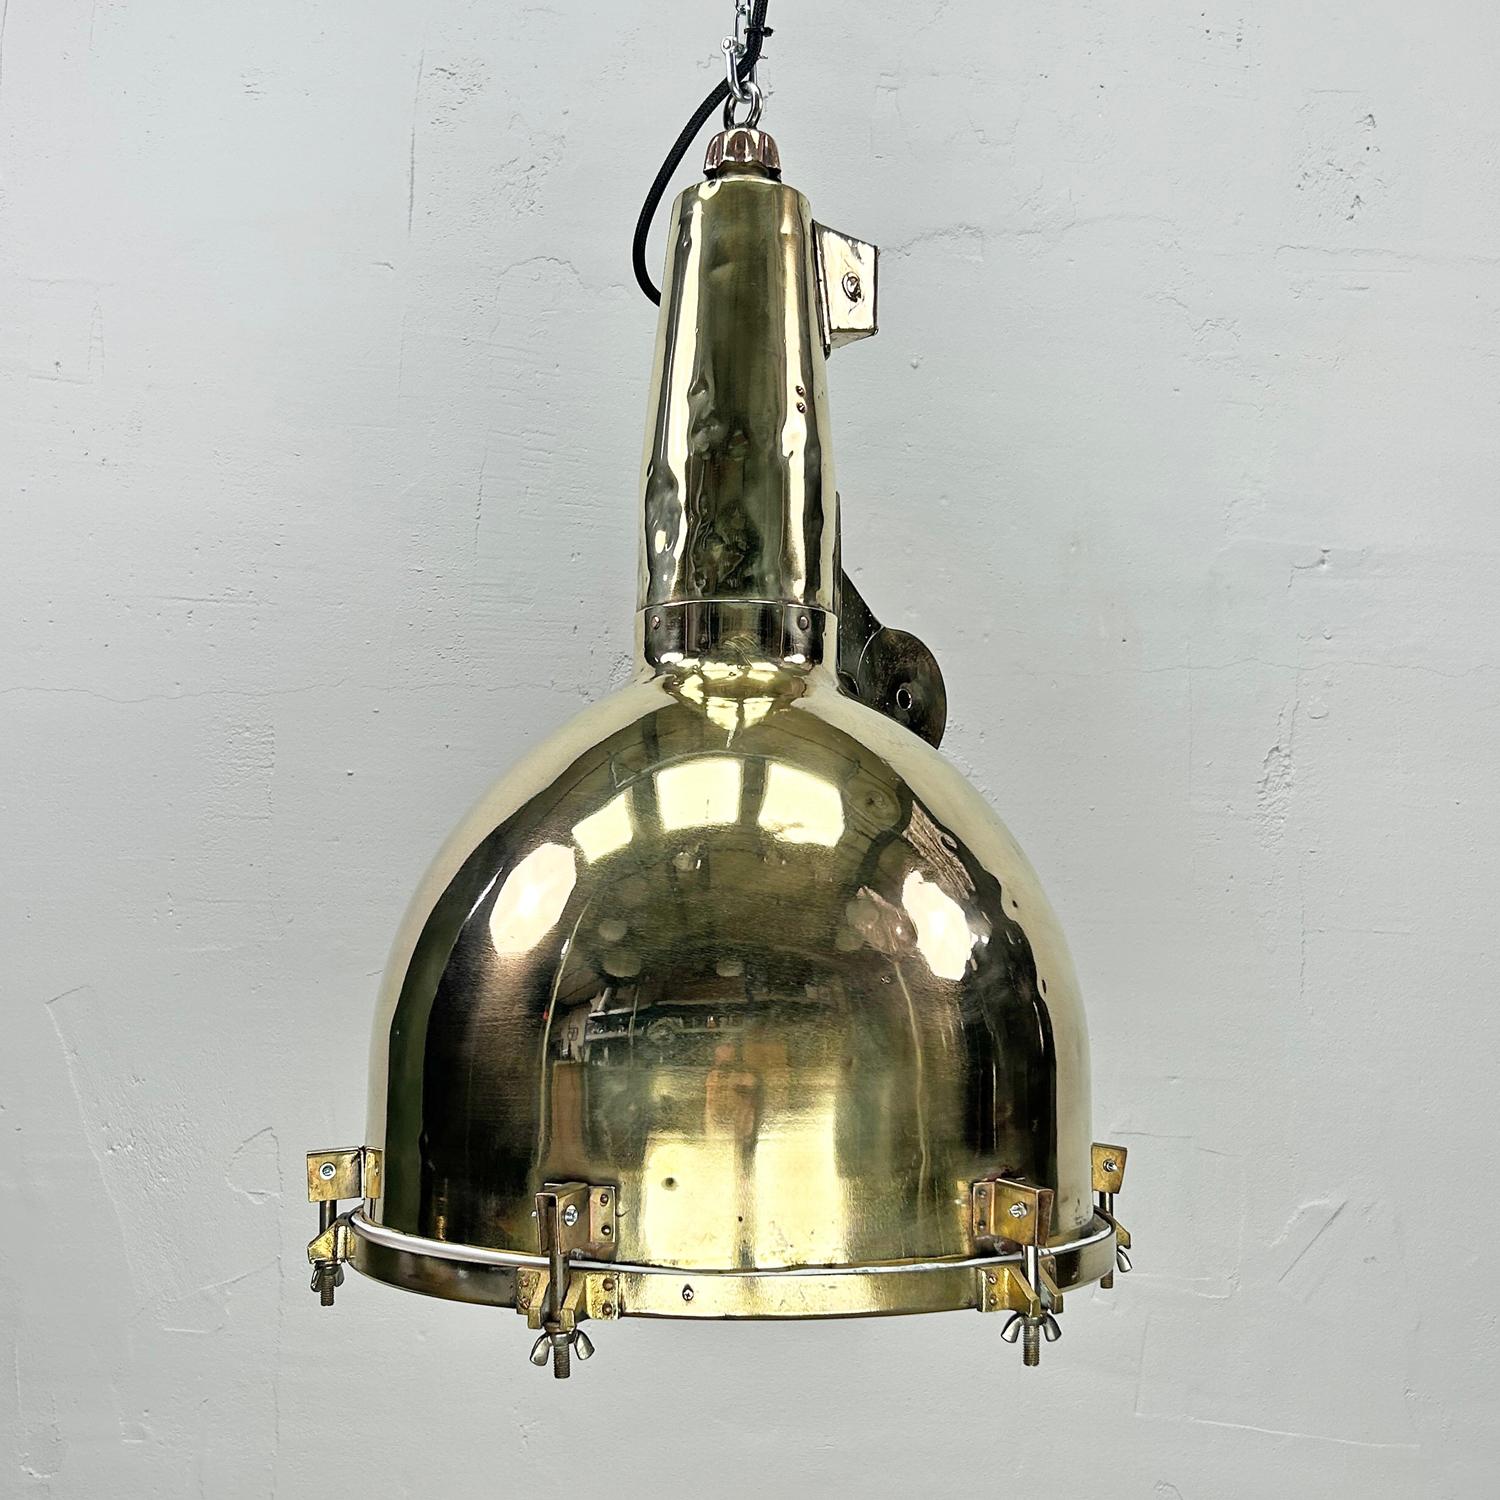 The large brass pendant light is a reclaimed vintage searchlight from decommissioned Japanese cargo ships built during the 1970's. Professionally refurbished, these original brass ceiling lights are ideal for creating authentic